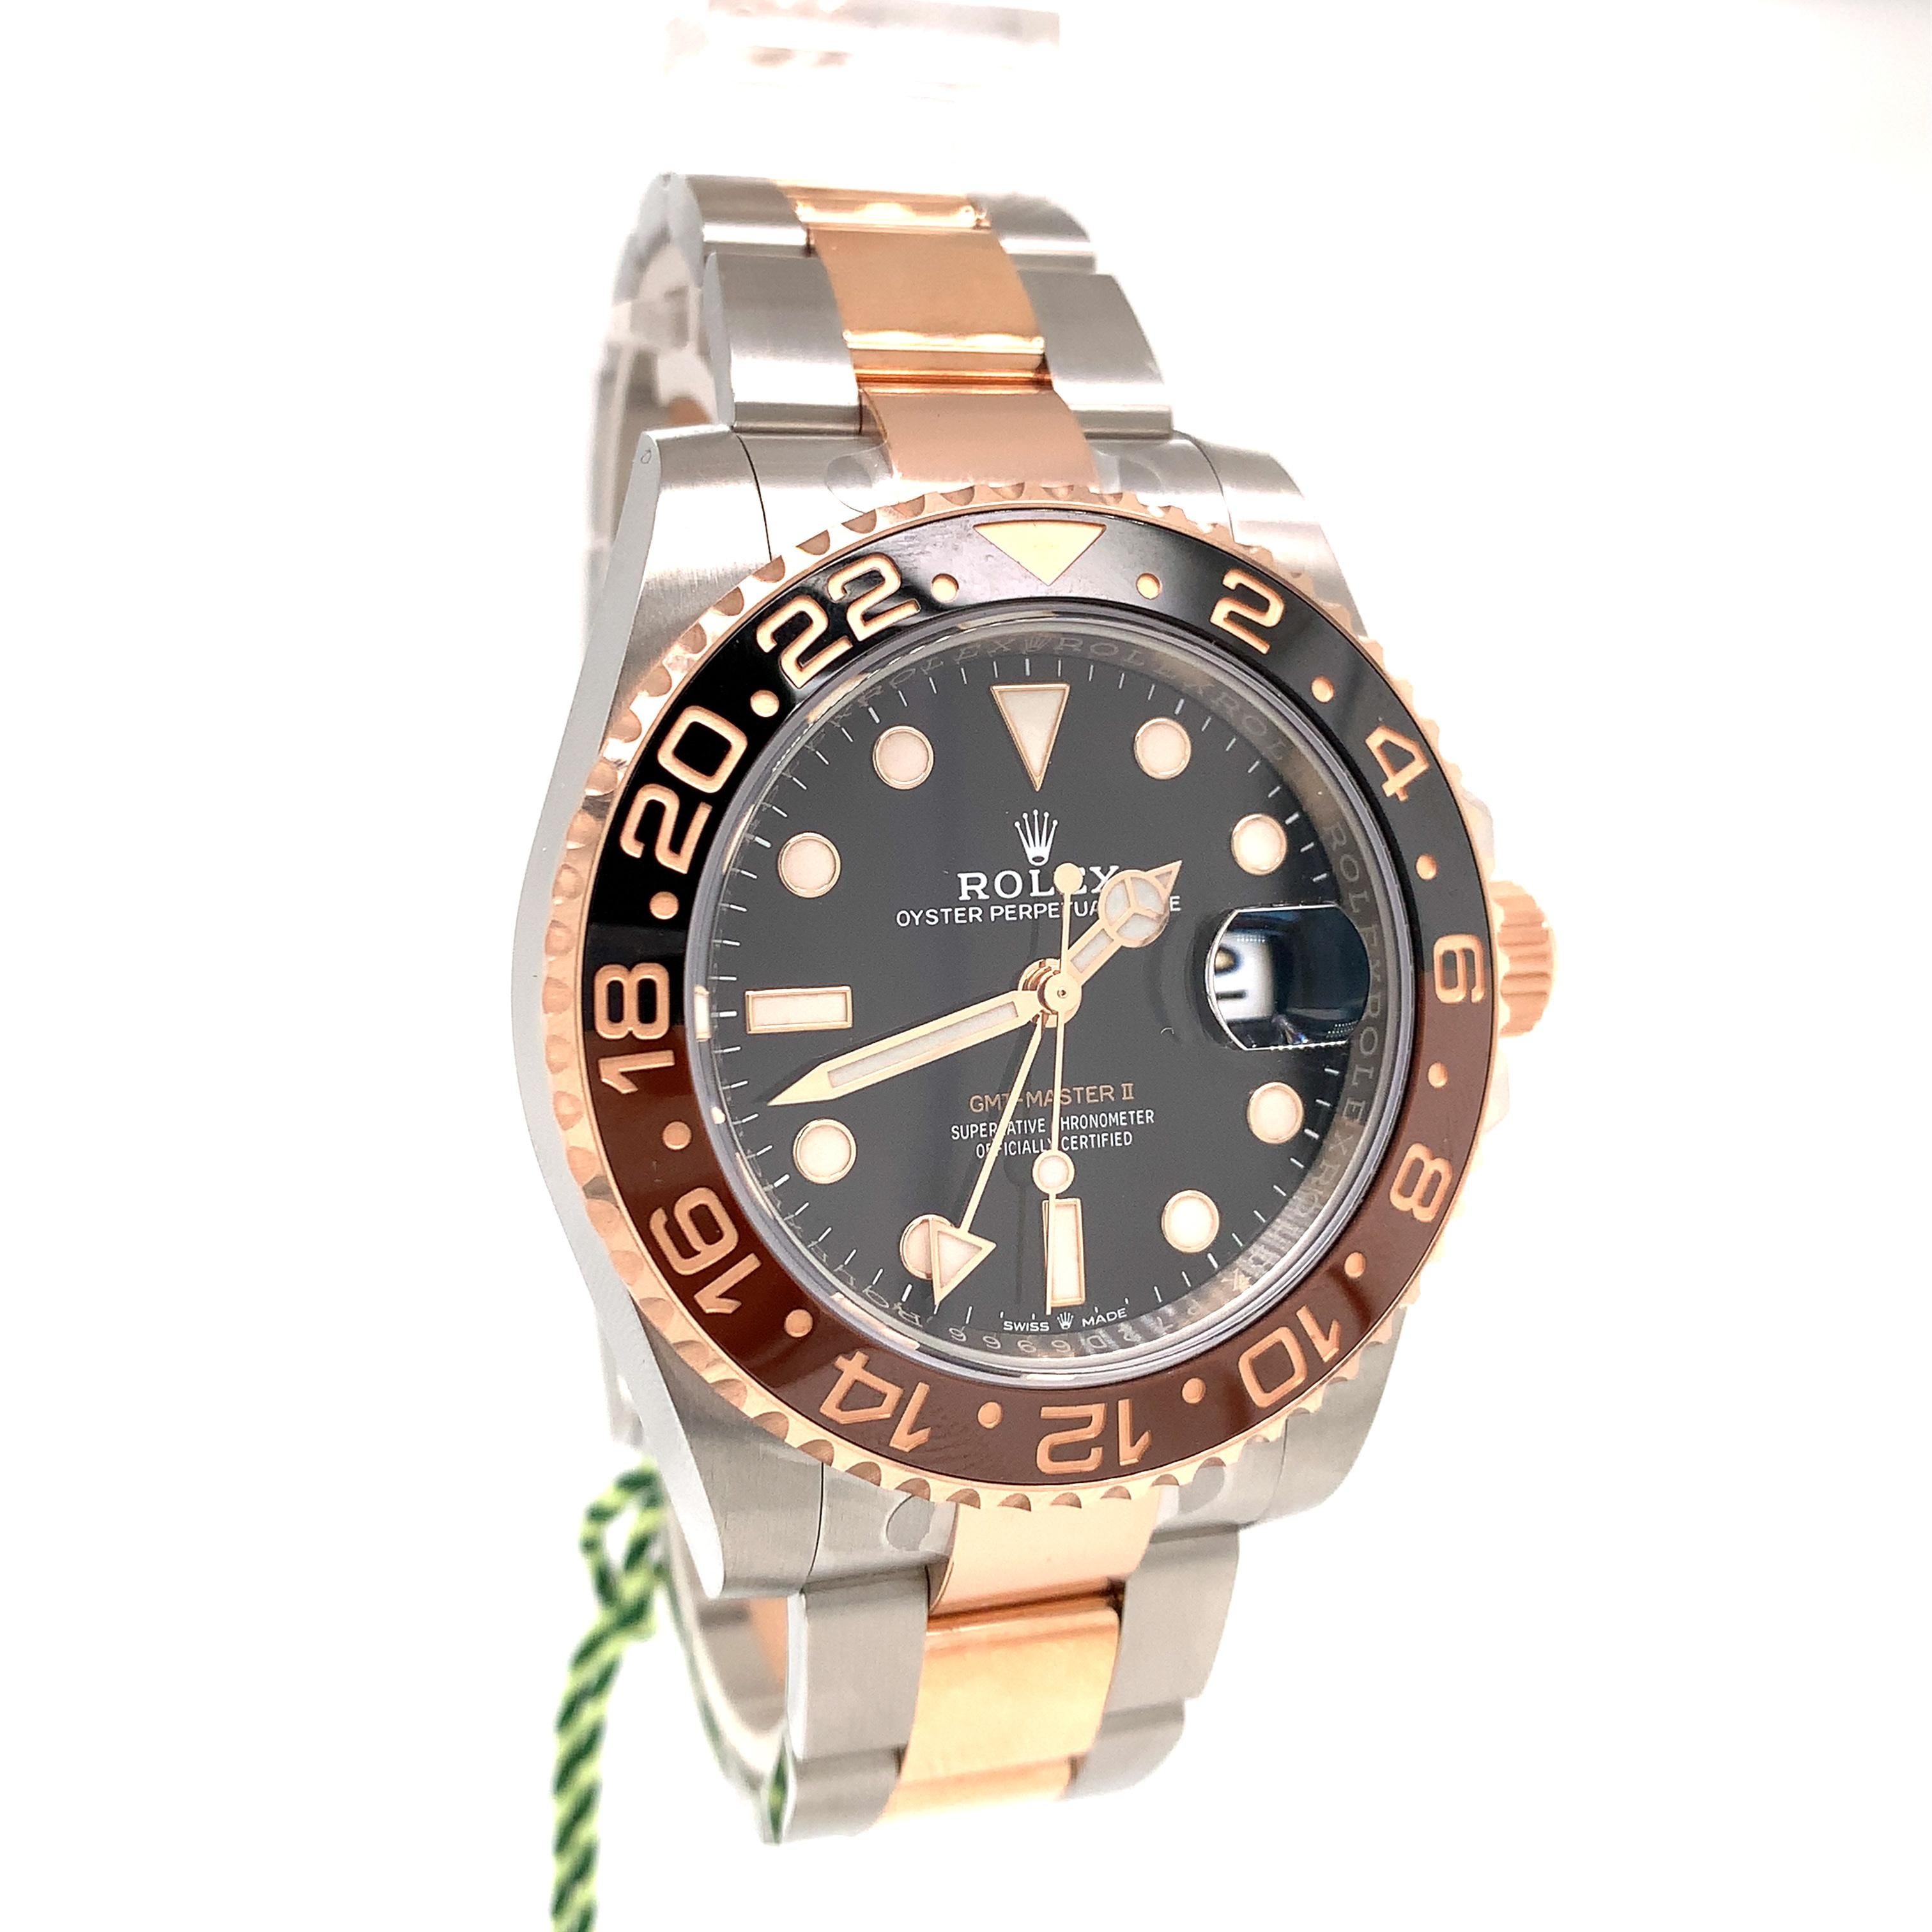 Rolex 126711 GMT-Master II 40mm Root Beer Black Dial Black/Brown Ceramic Bezel Stainless Steel and Rose Gold 2021 

Launched in 1954, the GMT Master (GMT = Greenwich Mean Time) was designed in collaboration with Pan American Airways. Having an